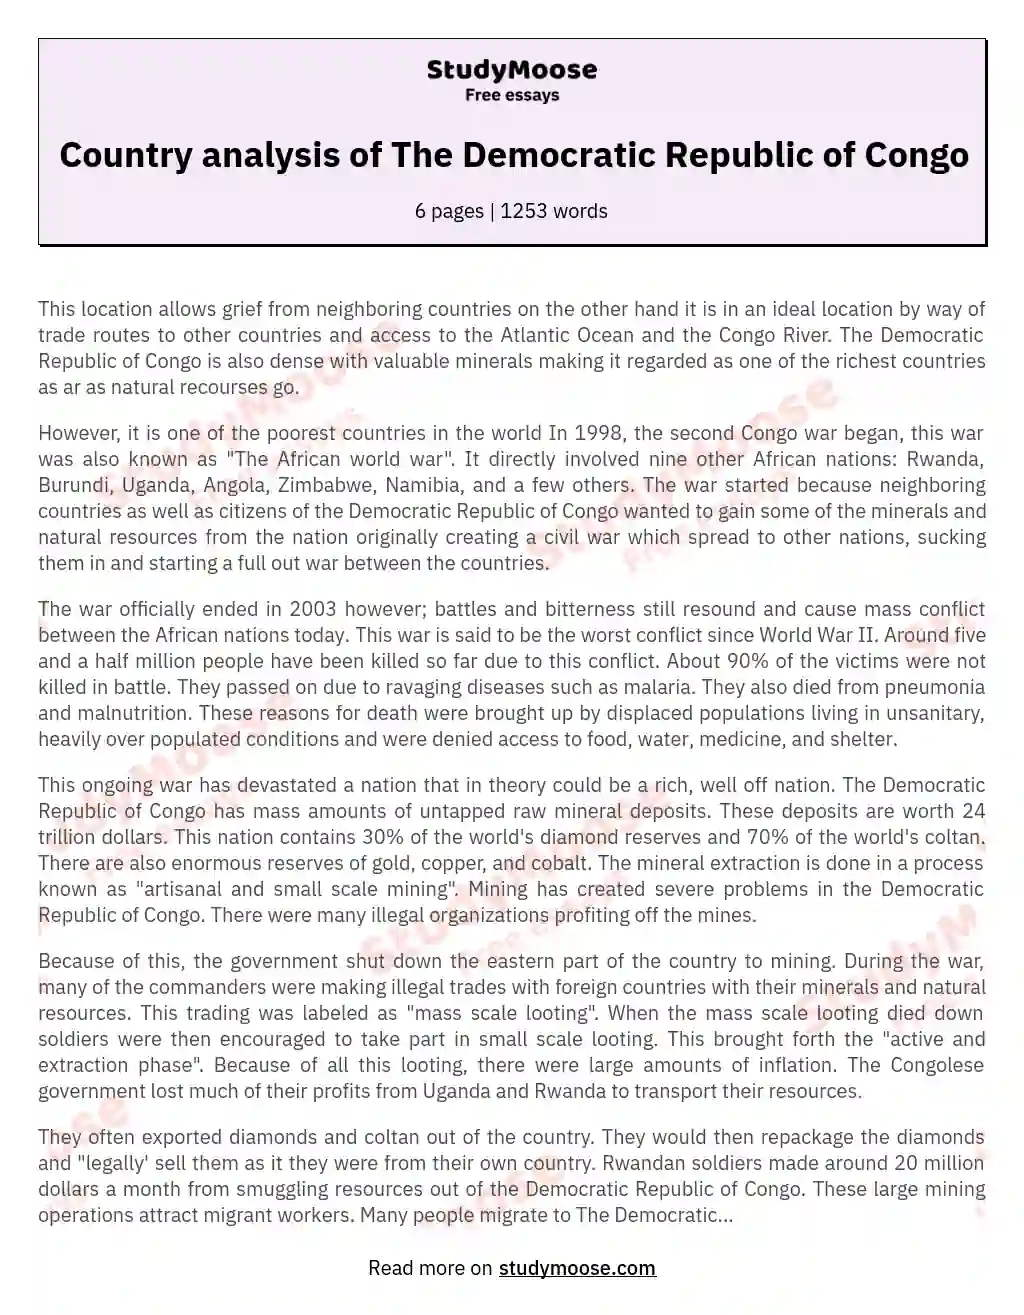 Challenges and Opportunities in the Democratic Republic of Congo essay